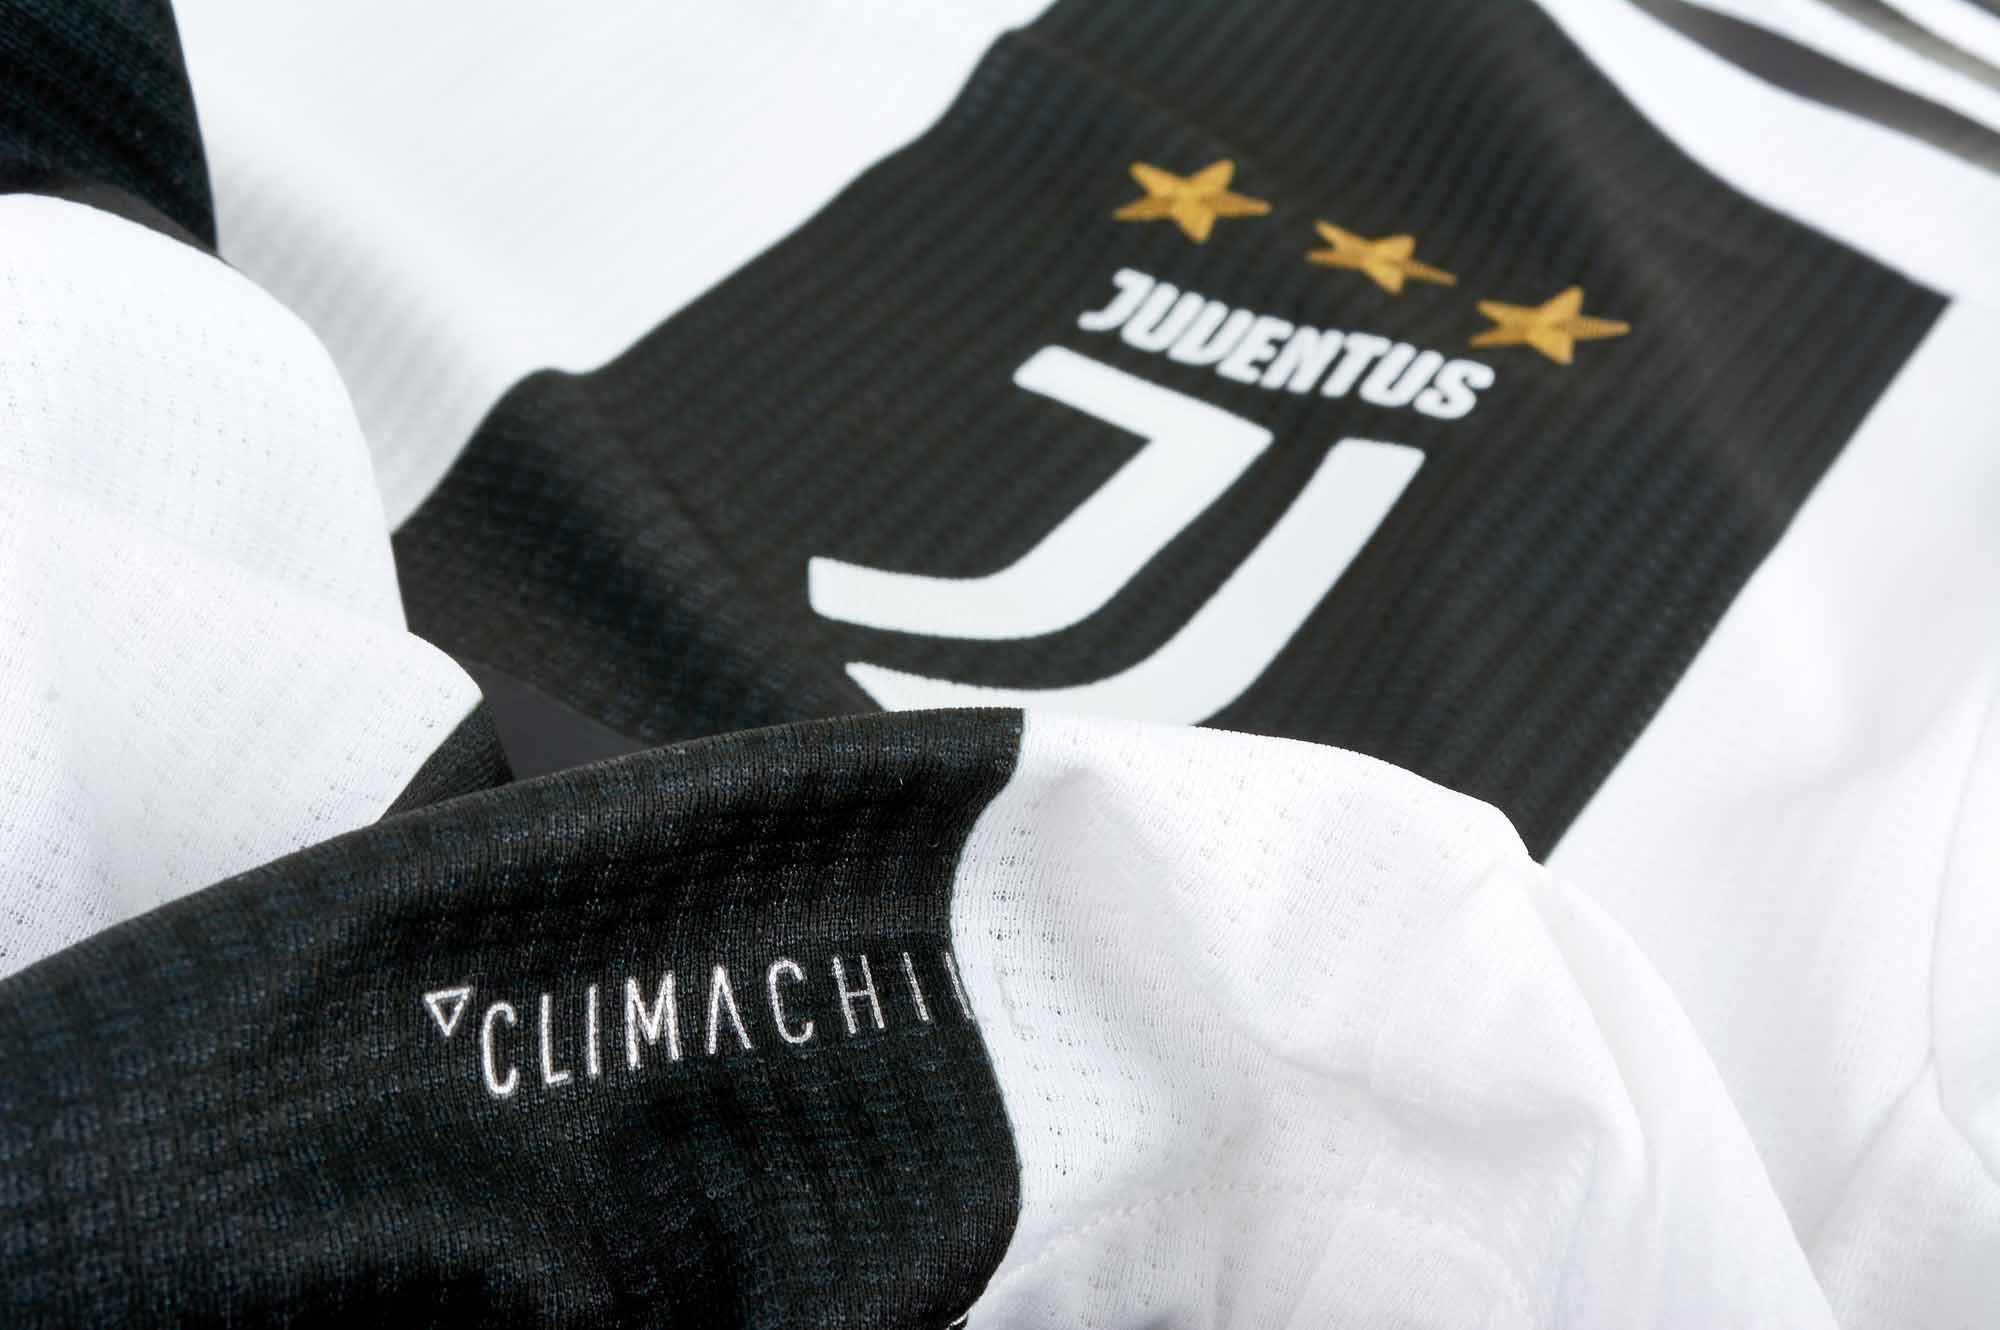 juventus home authentic jersey